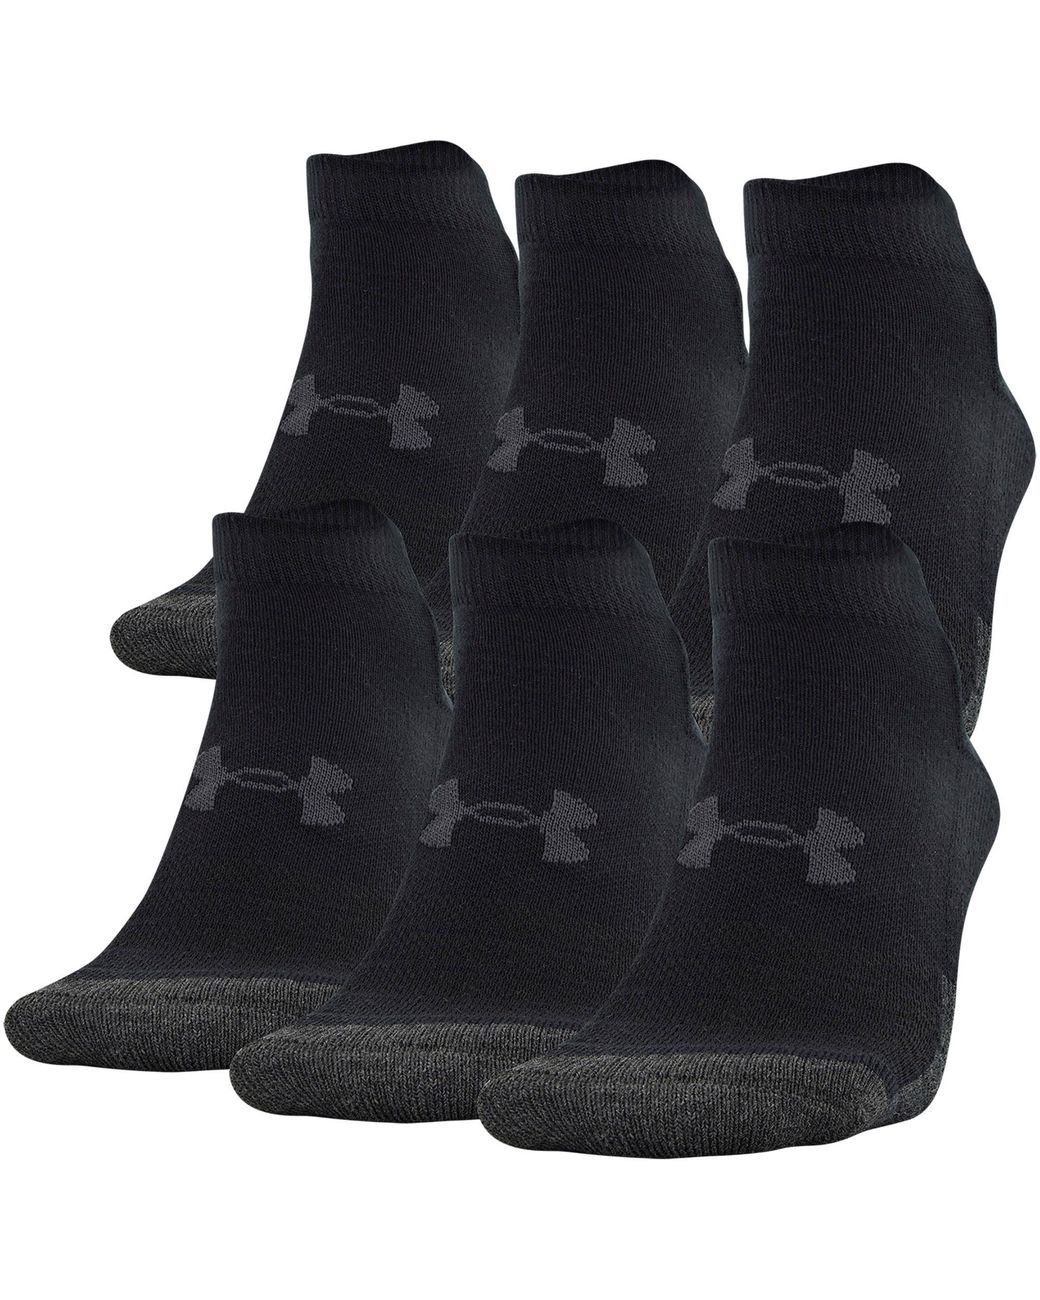 Under Armour Adult Performance Tech Low Cut Socks 6 Pack in Black for ...